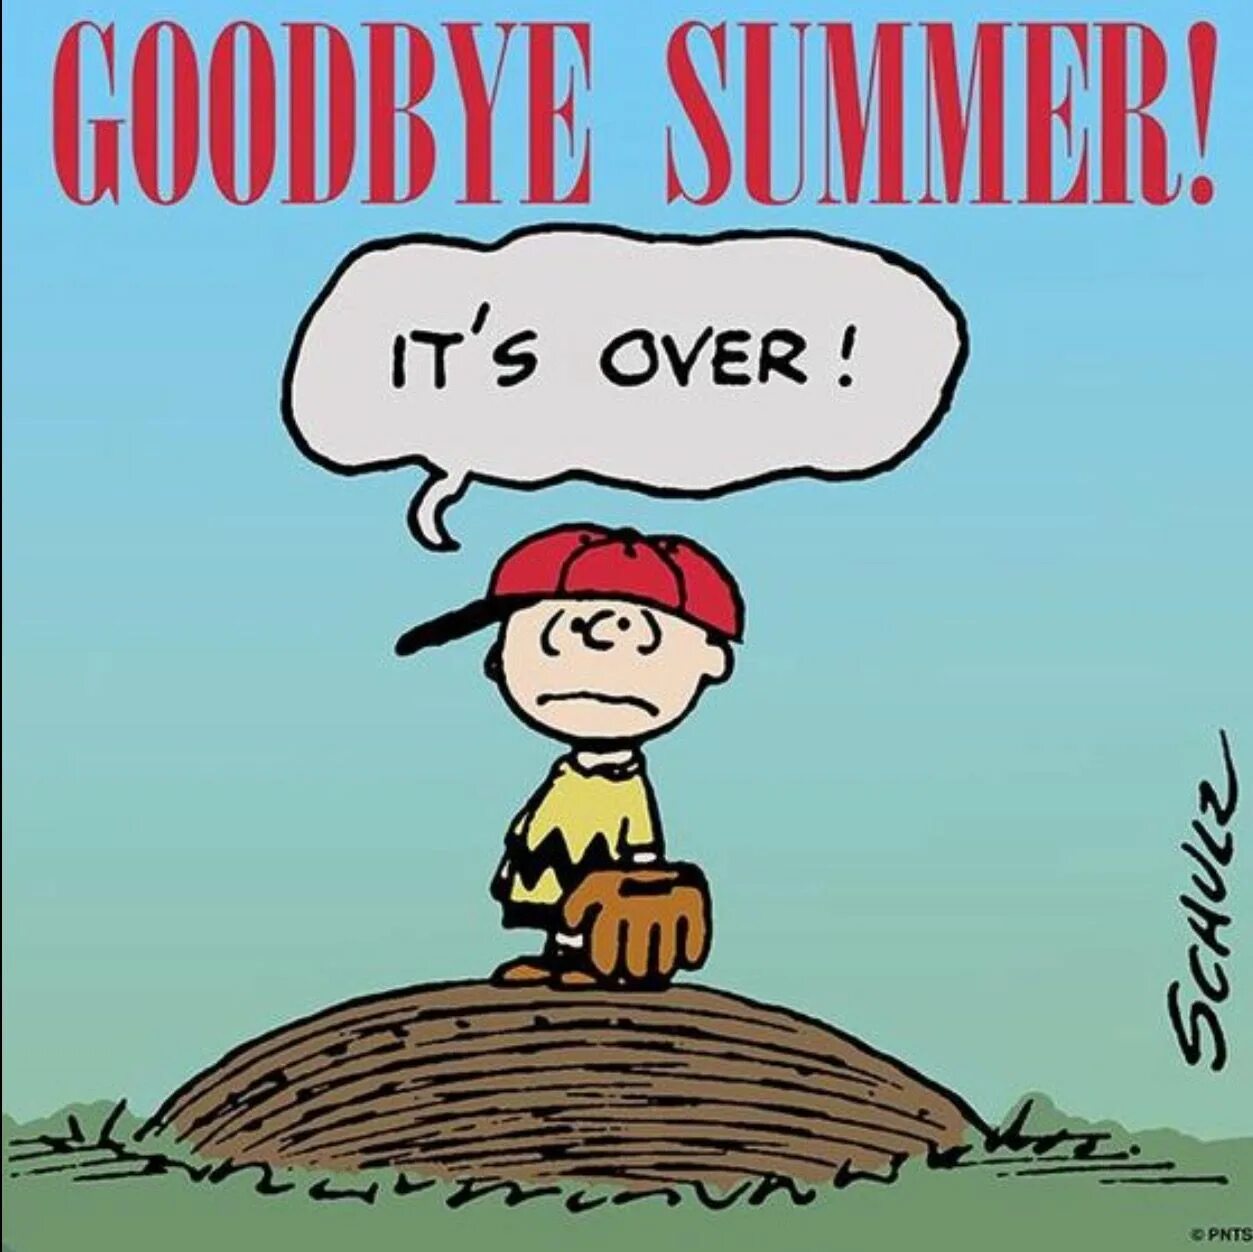 Over fun. Snoopy Summer. Be over. Summer is over. Funny Holiday.